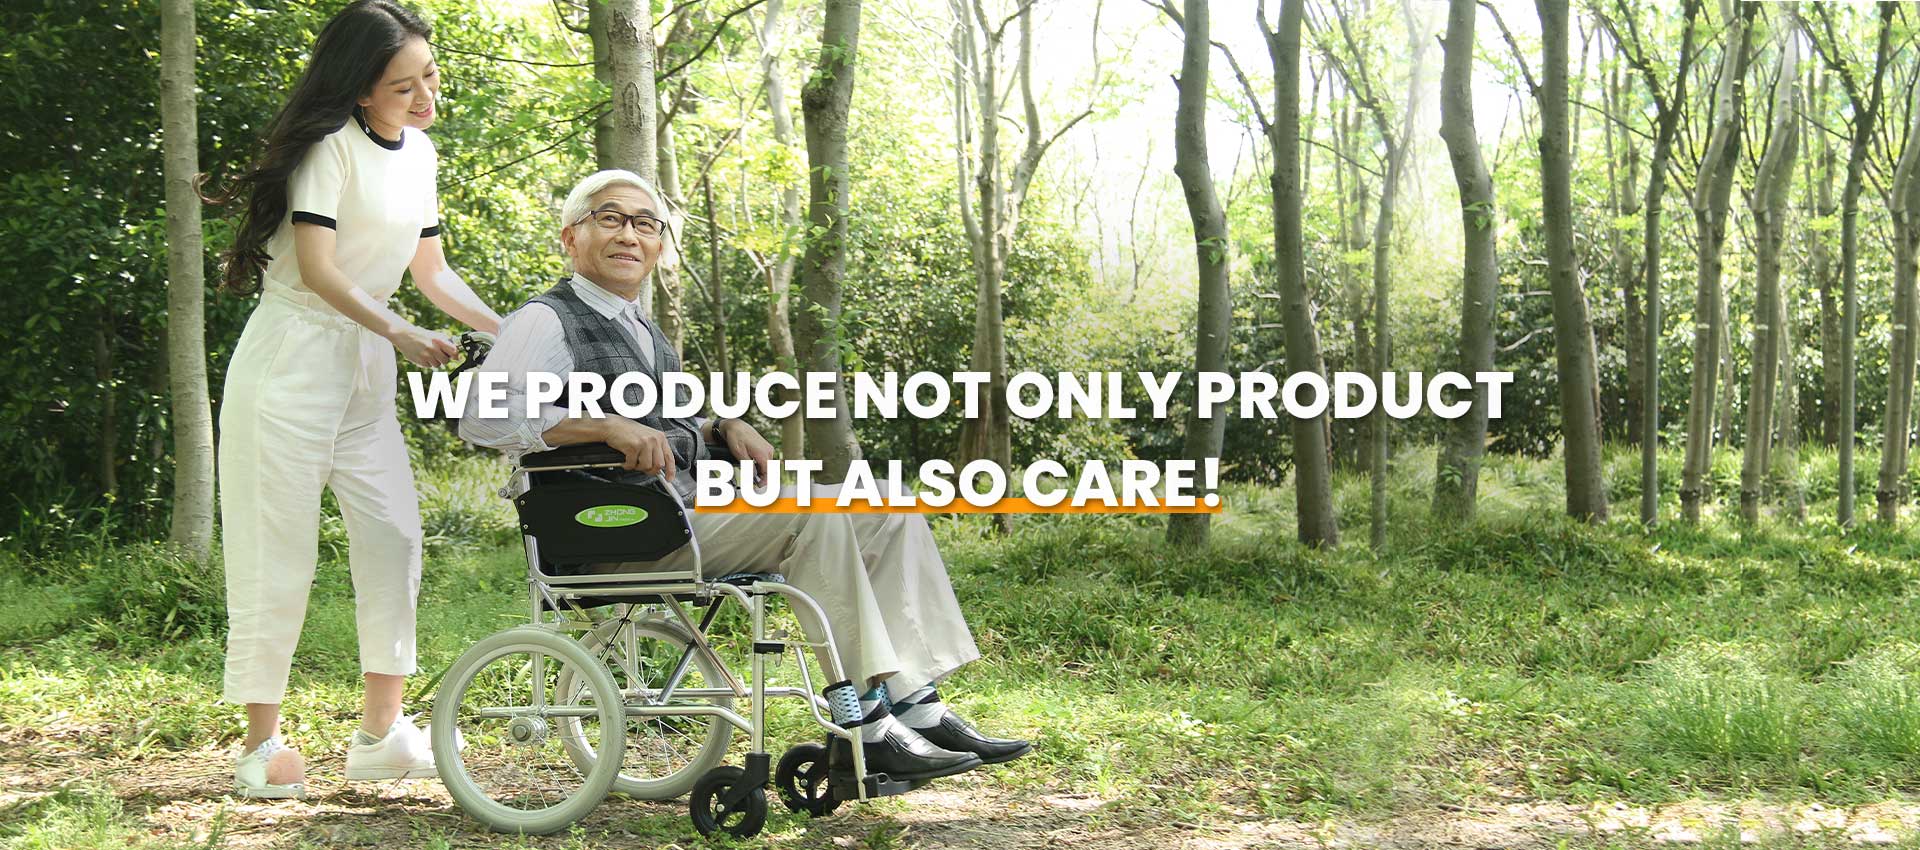 We produce not only product, but also care.